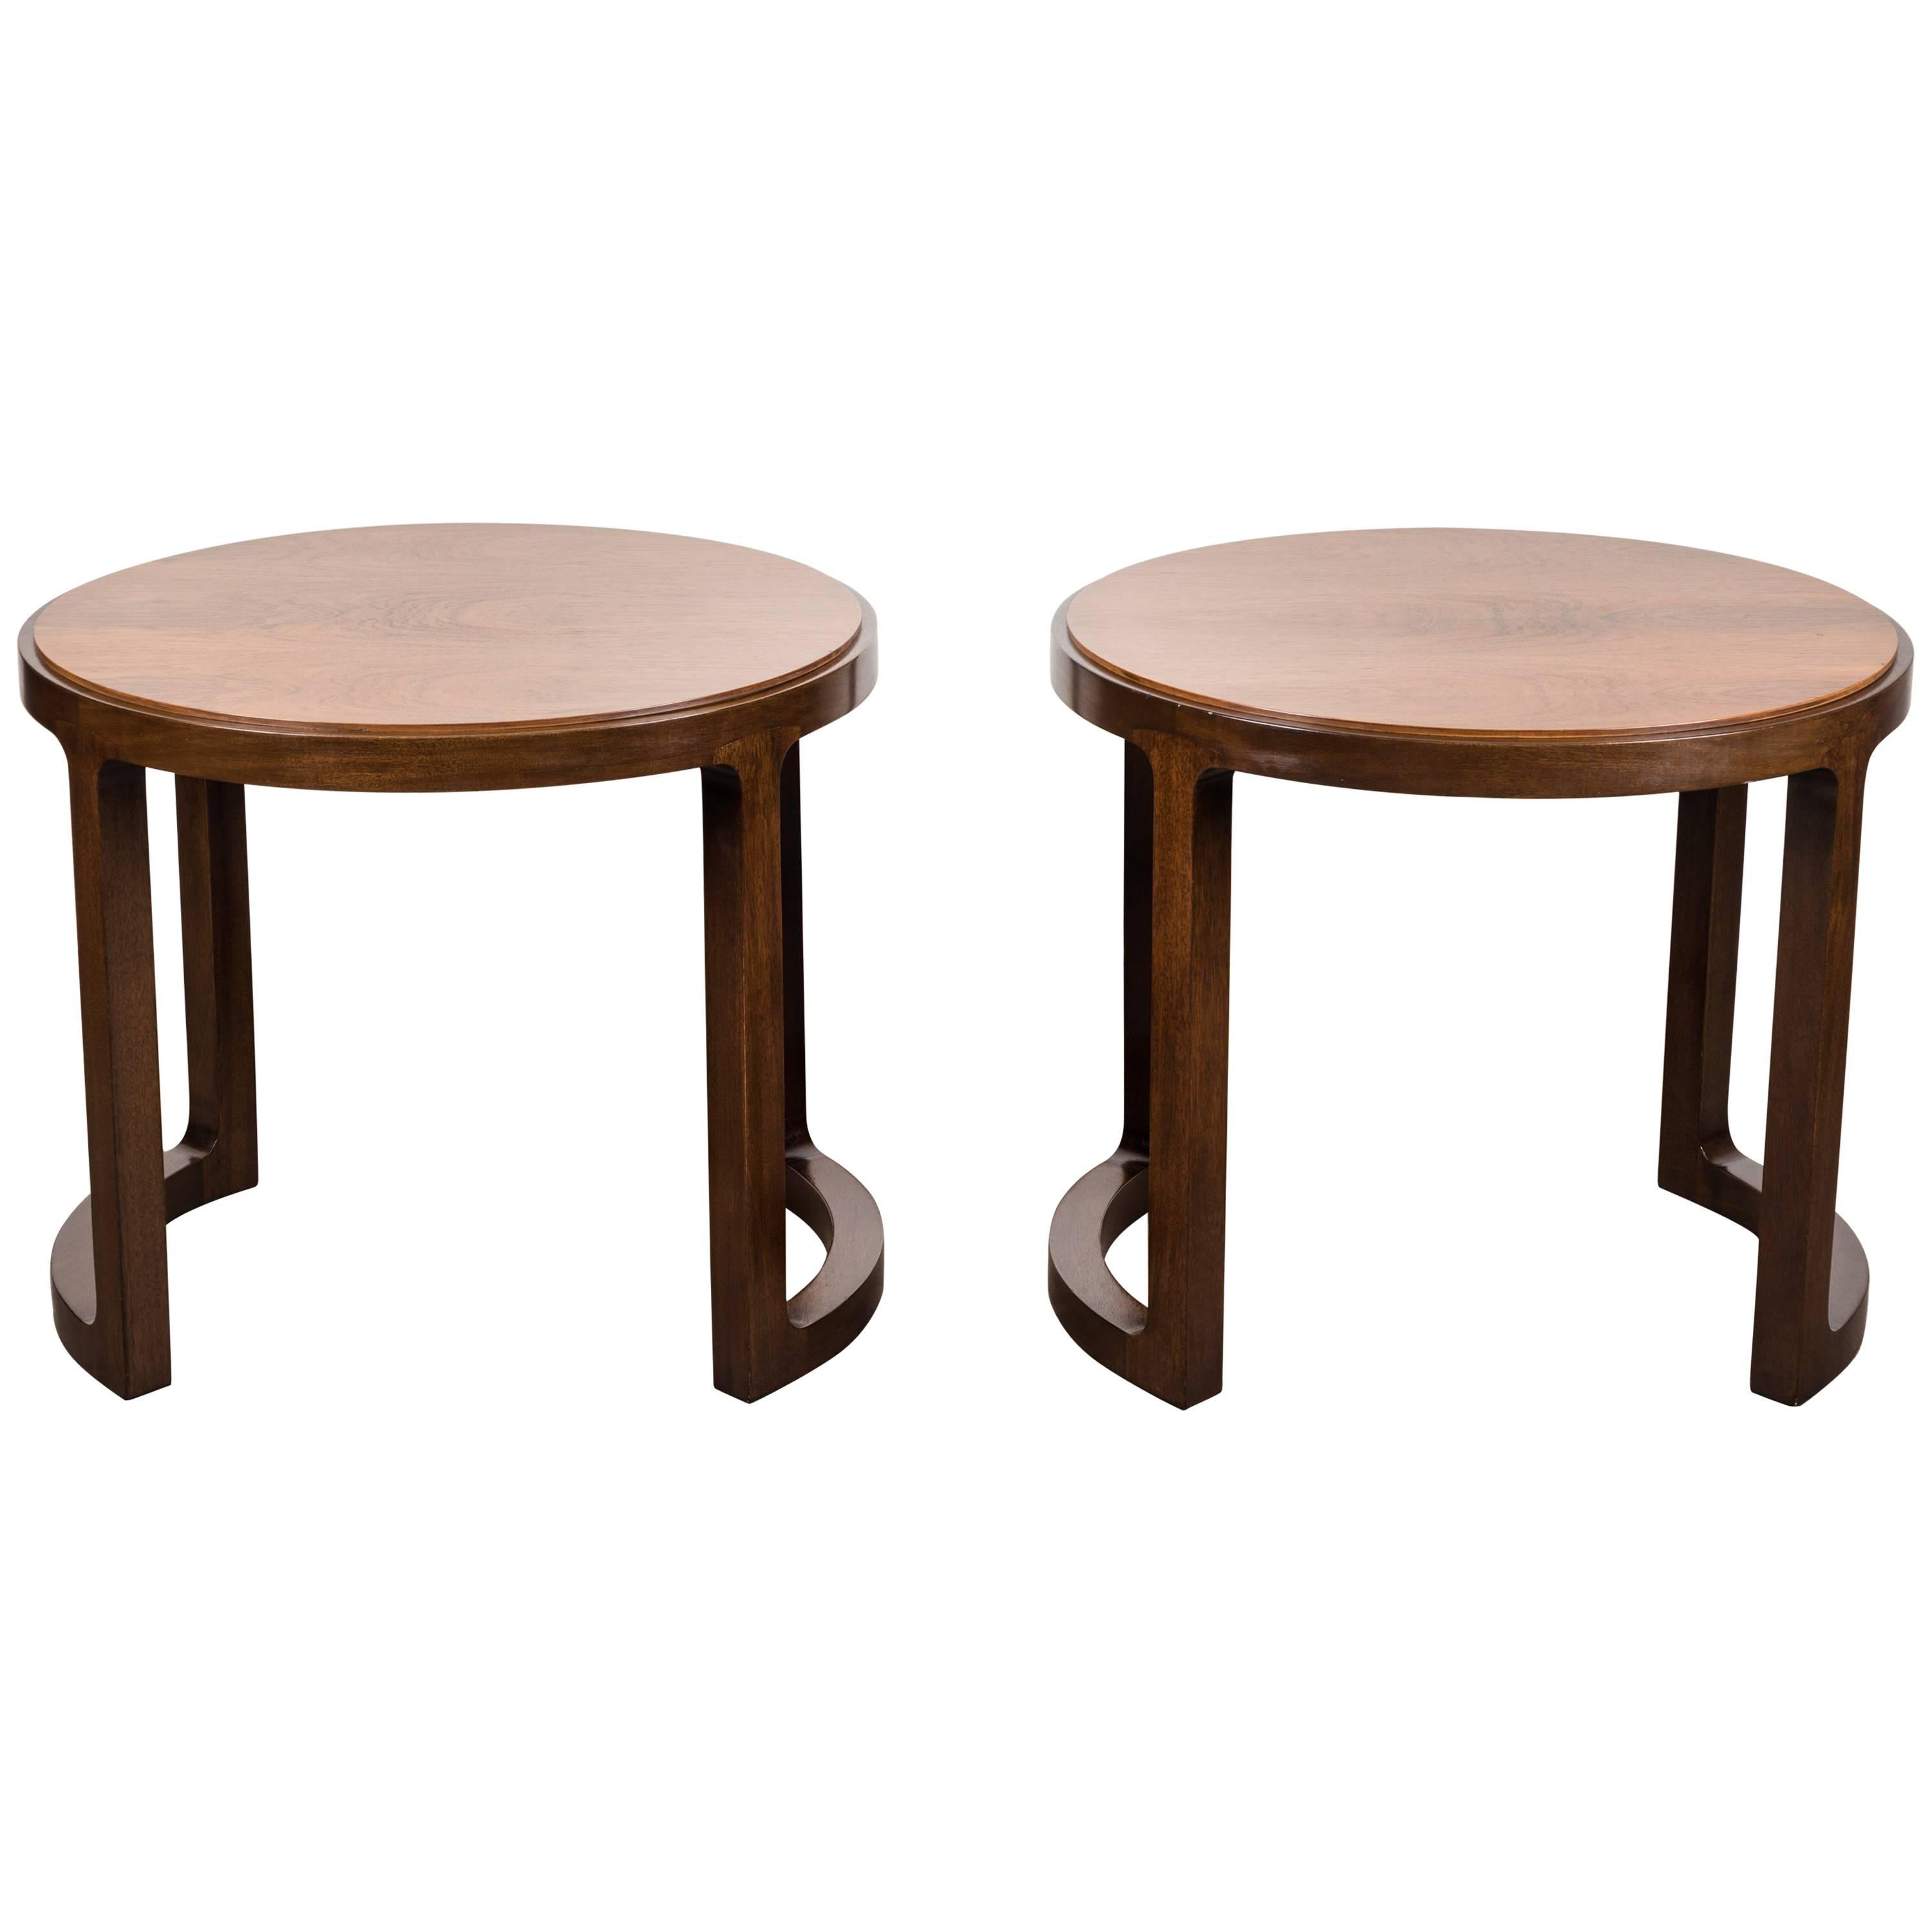 Pair of Rosewood and Mahogany Side Table by Edward Wormley for Dunbar